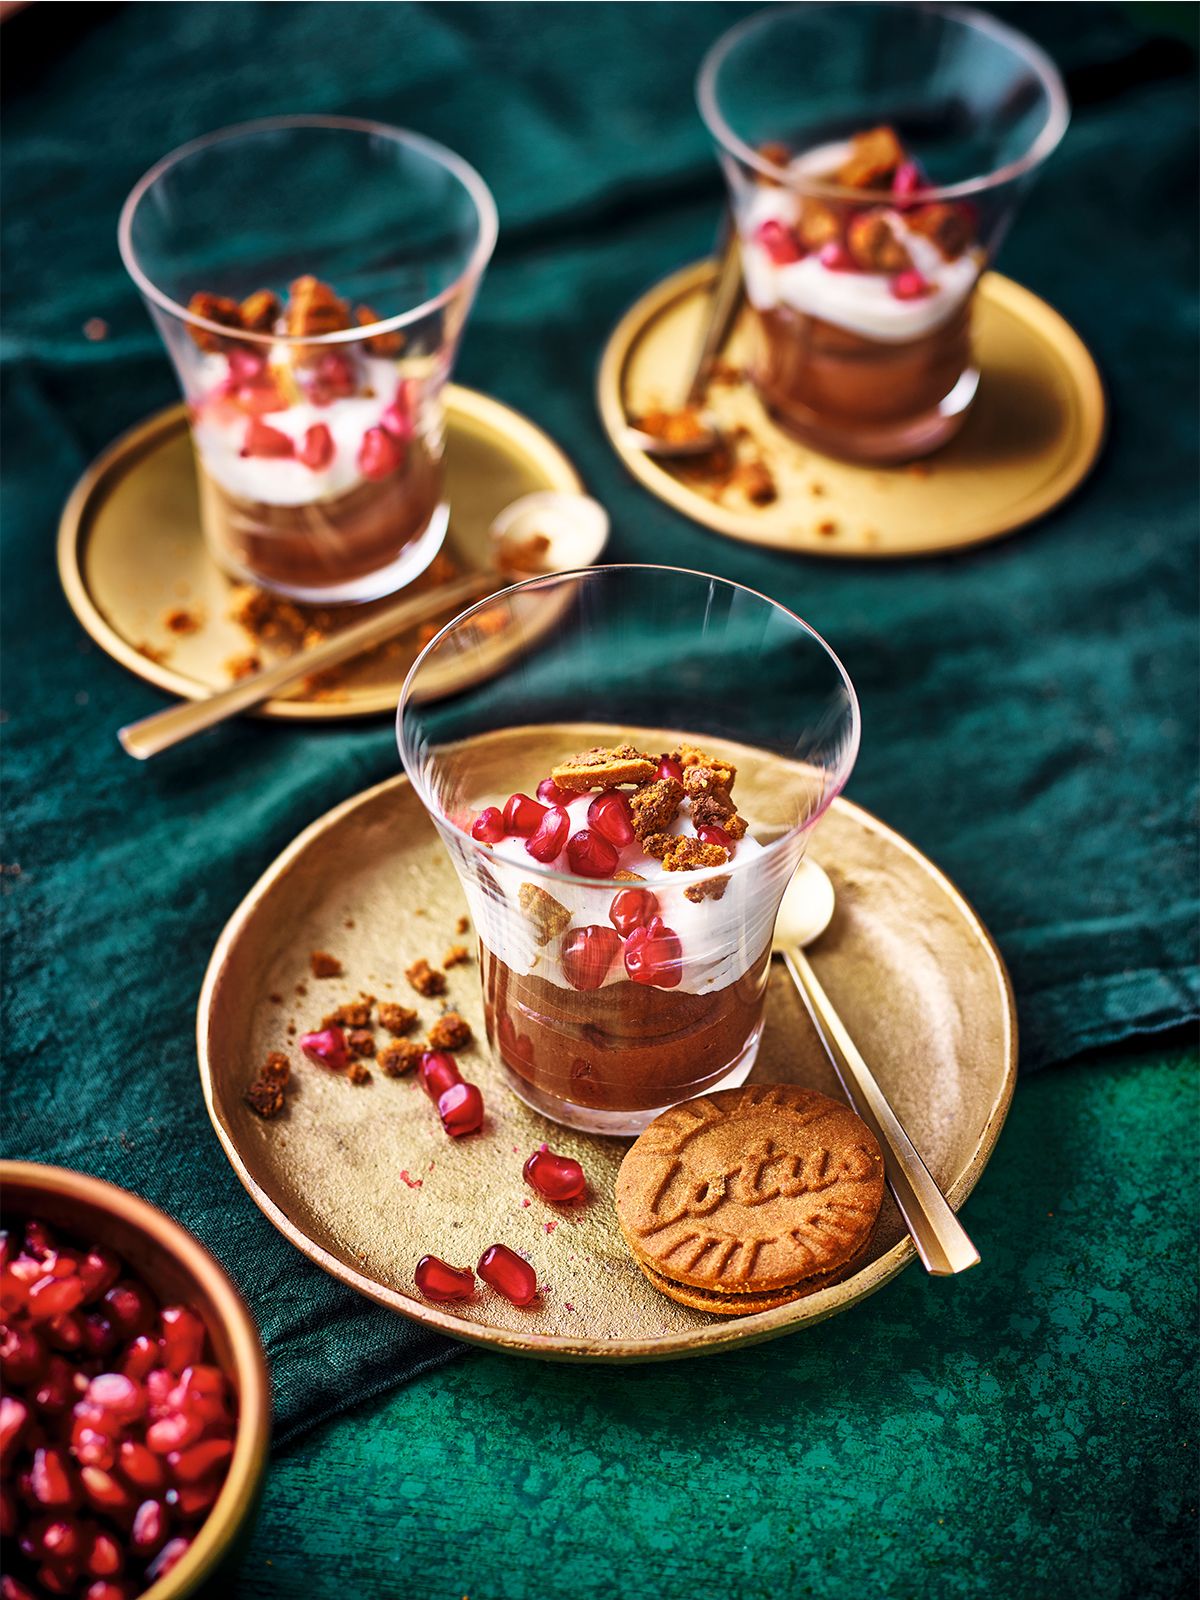 Chocolate & brandy mousse with Lotus biscuit crumbs